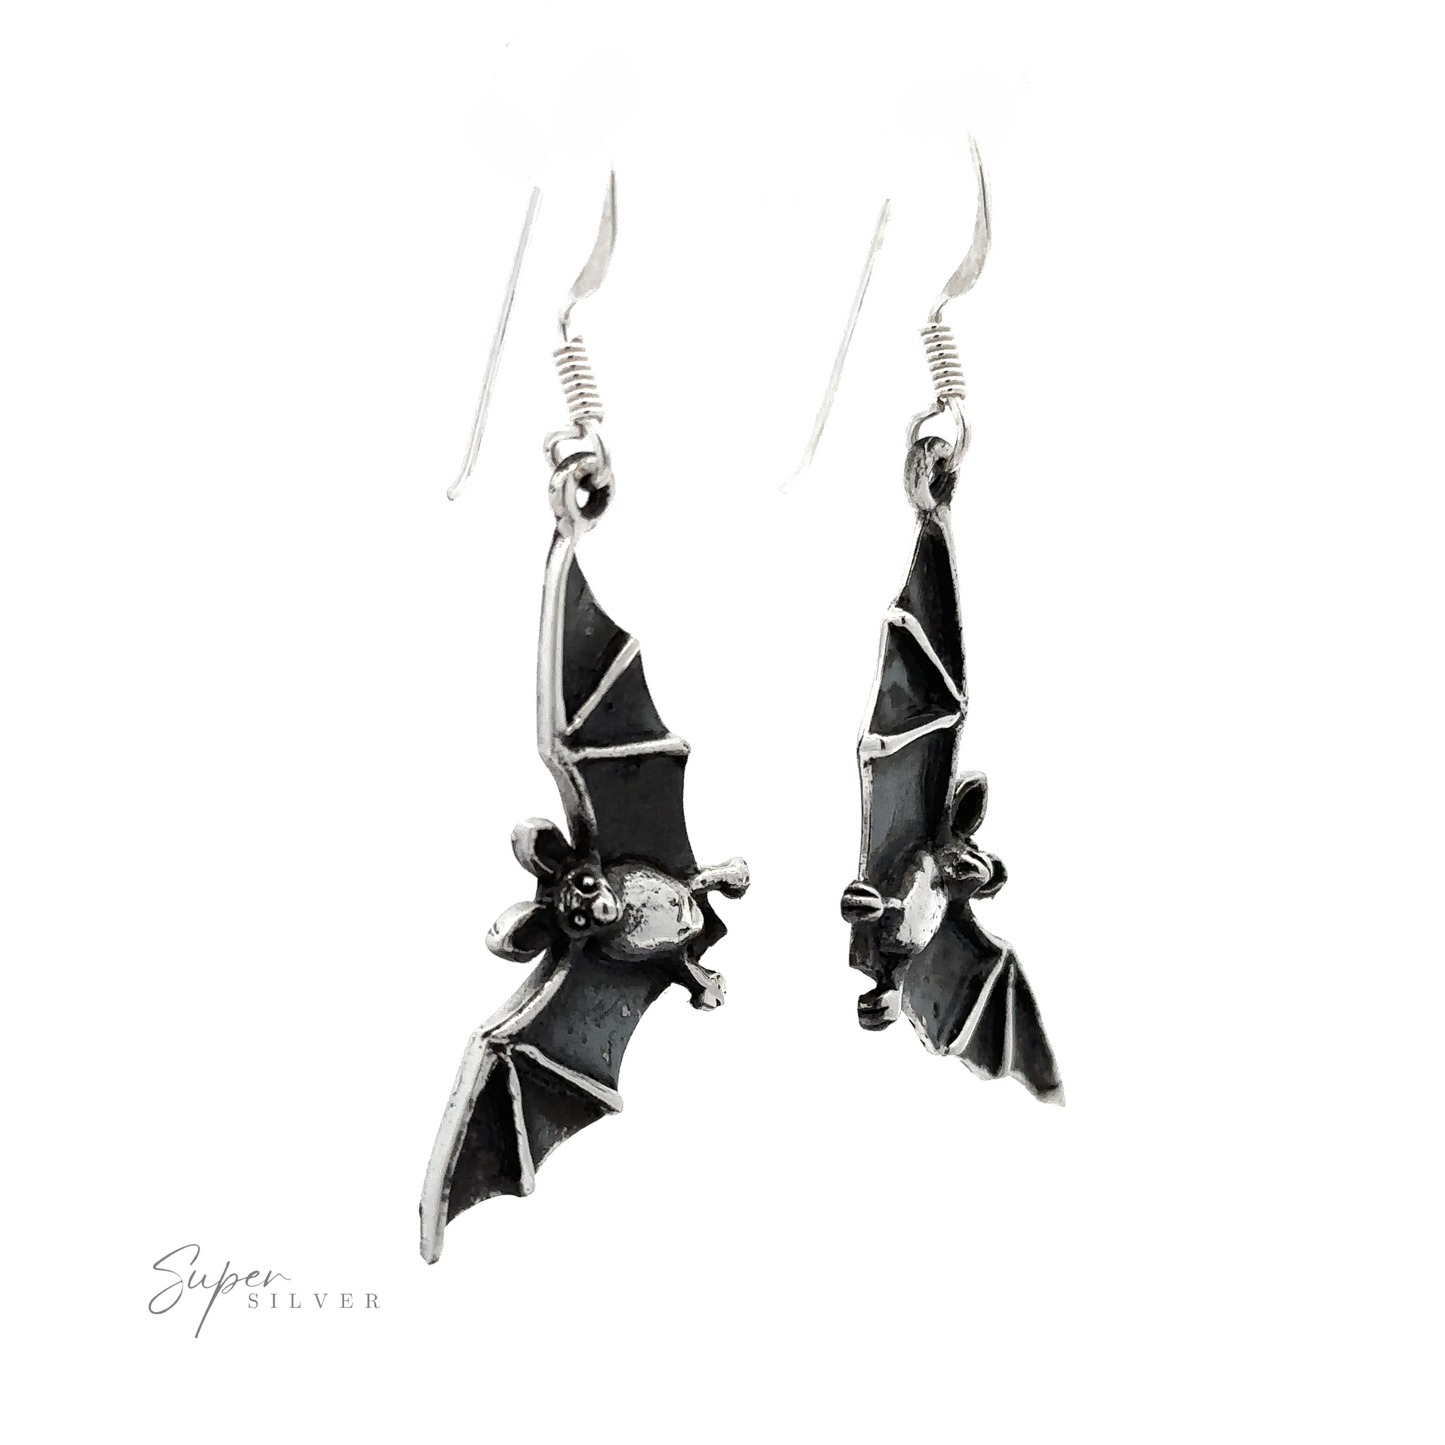 A pair of Flying Bat Earrings with small floral details at the center, hanging from hooks, against a white background.